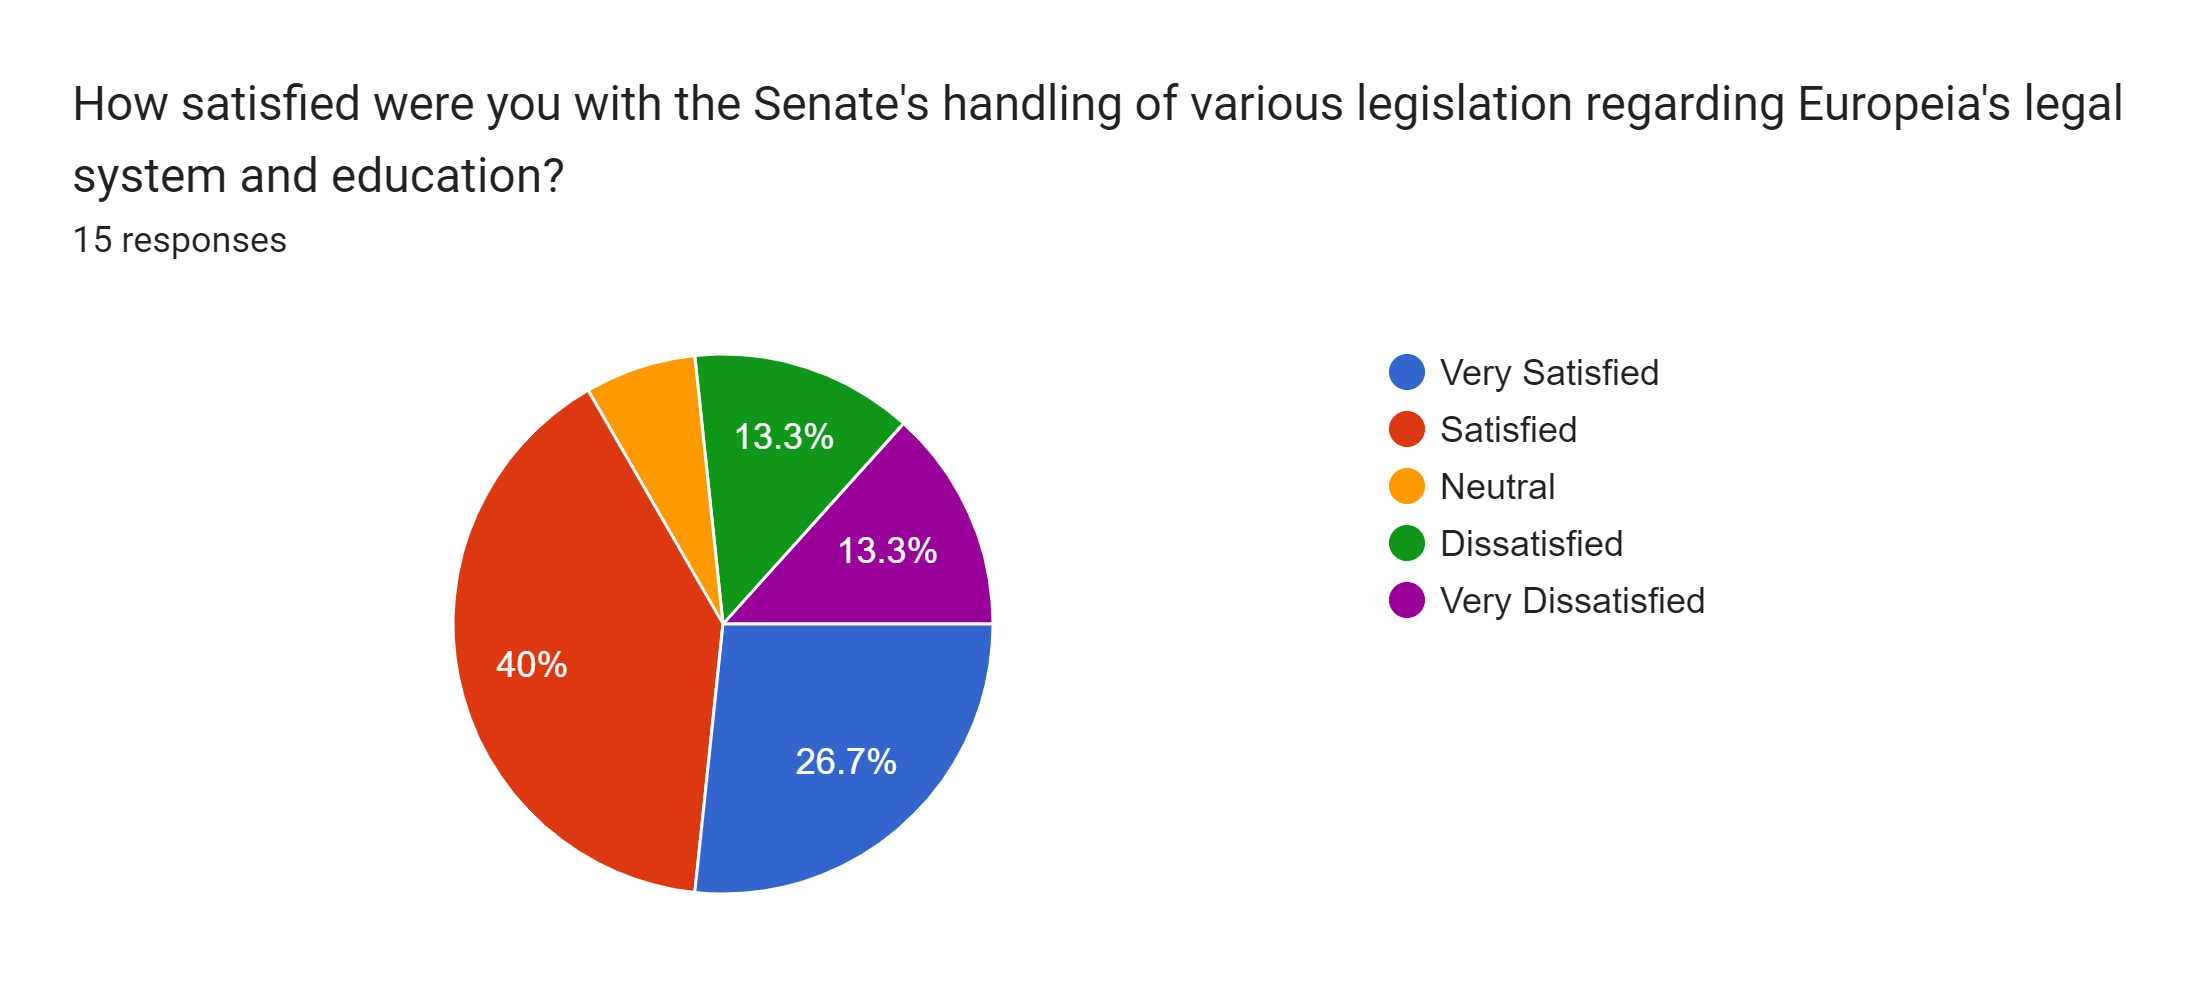 Forms response chart. Question title: How satisfied were you with the Senate's handling of various legislation regarding Europeia's legal system and education?. Number of responses: 15 responses.